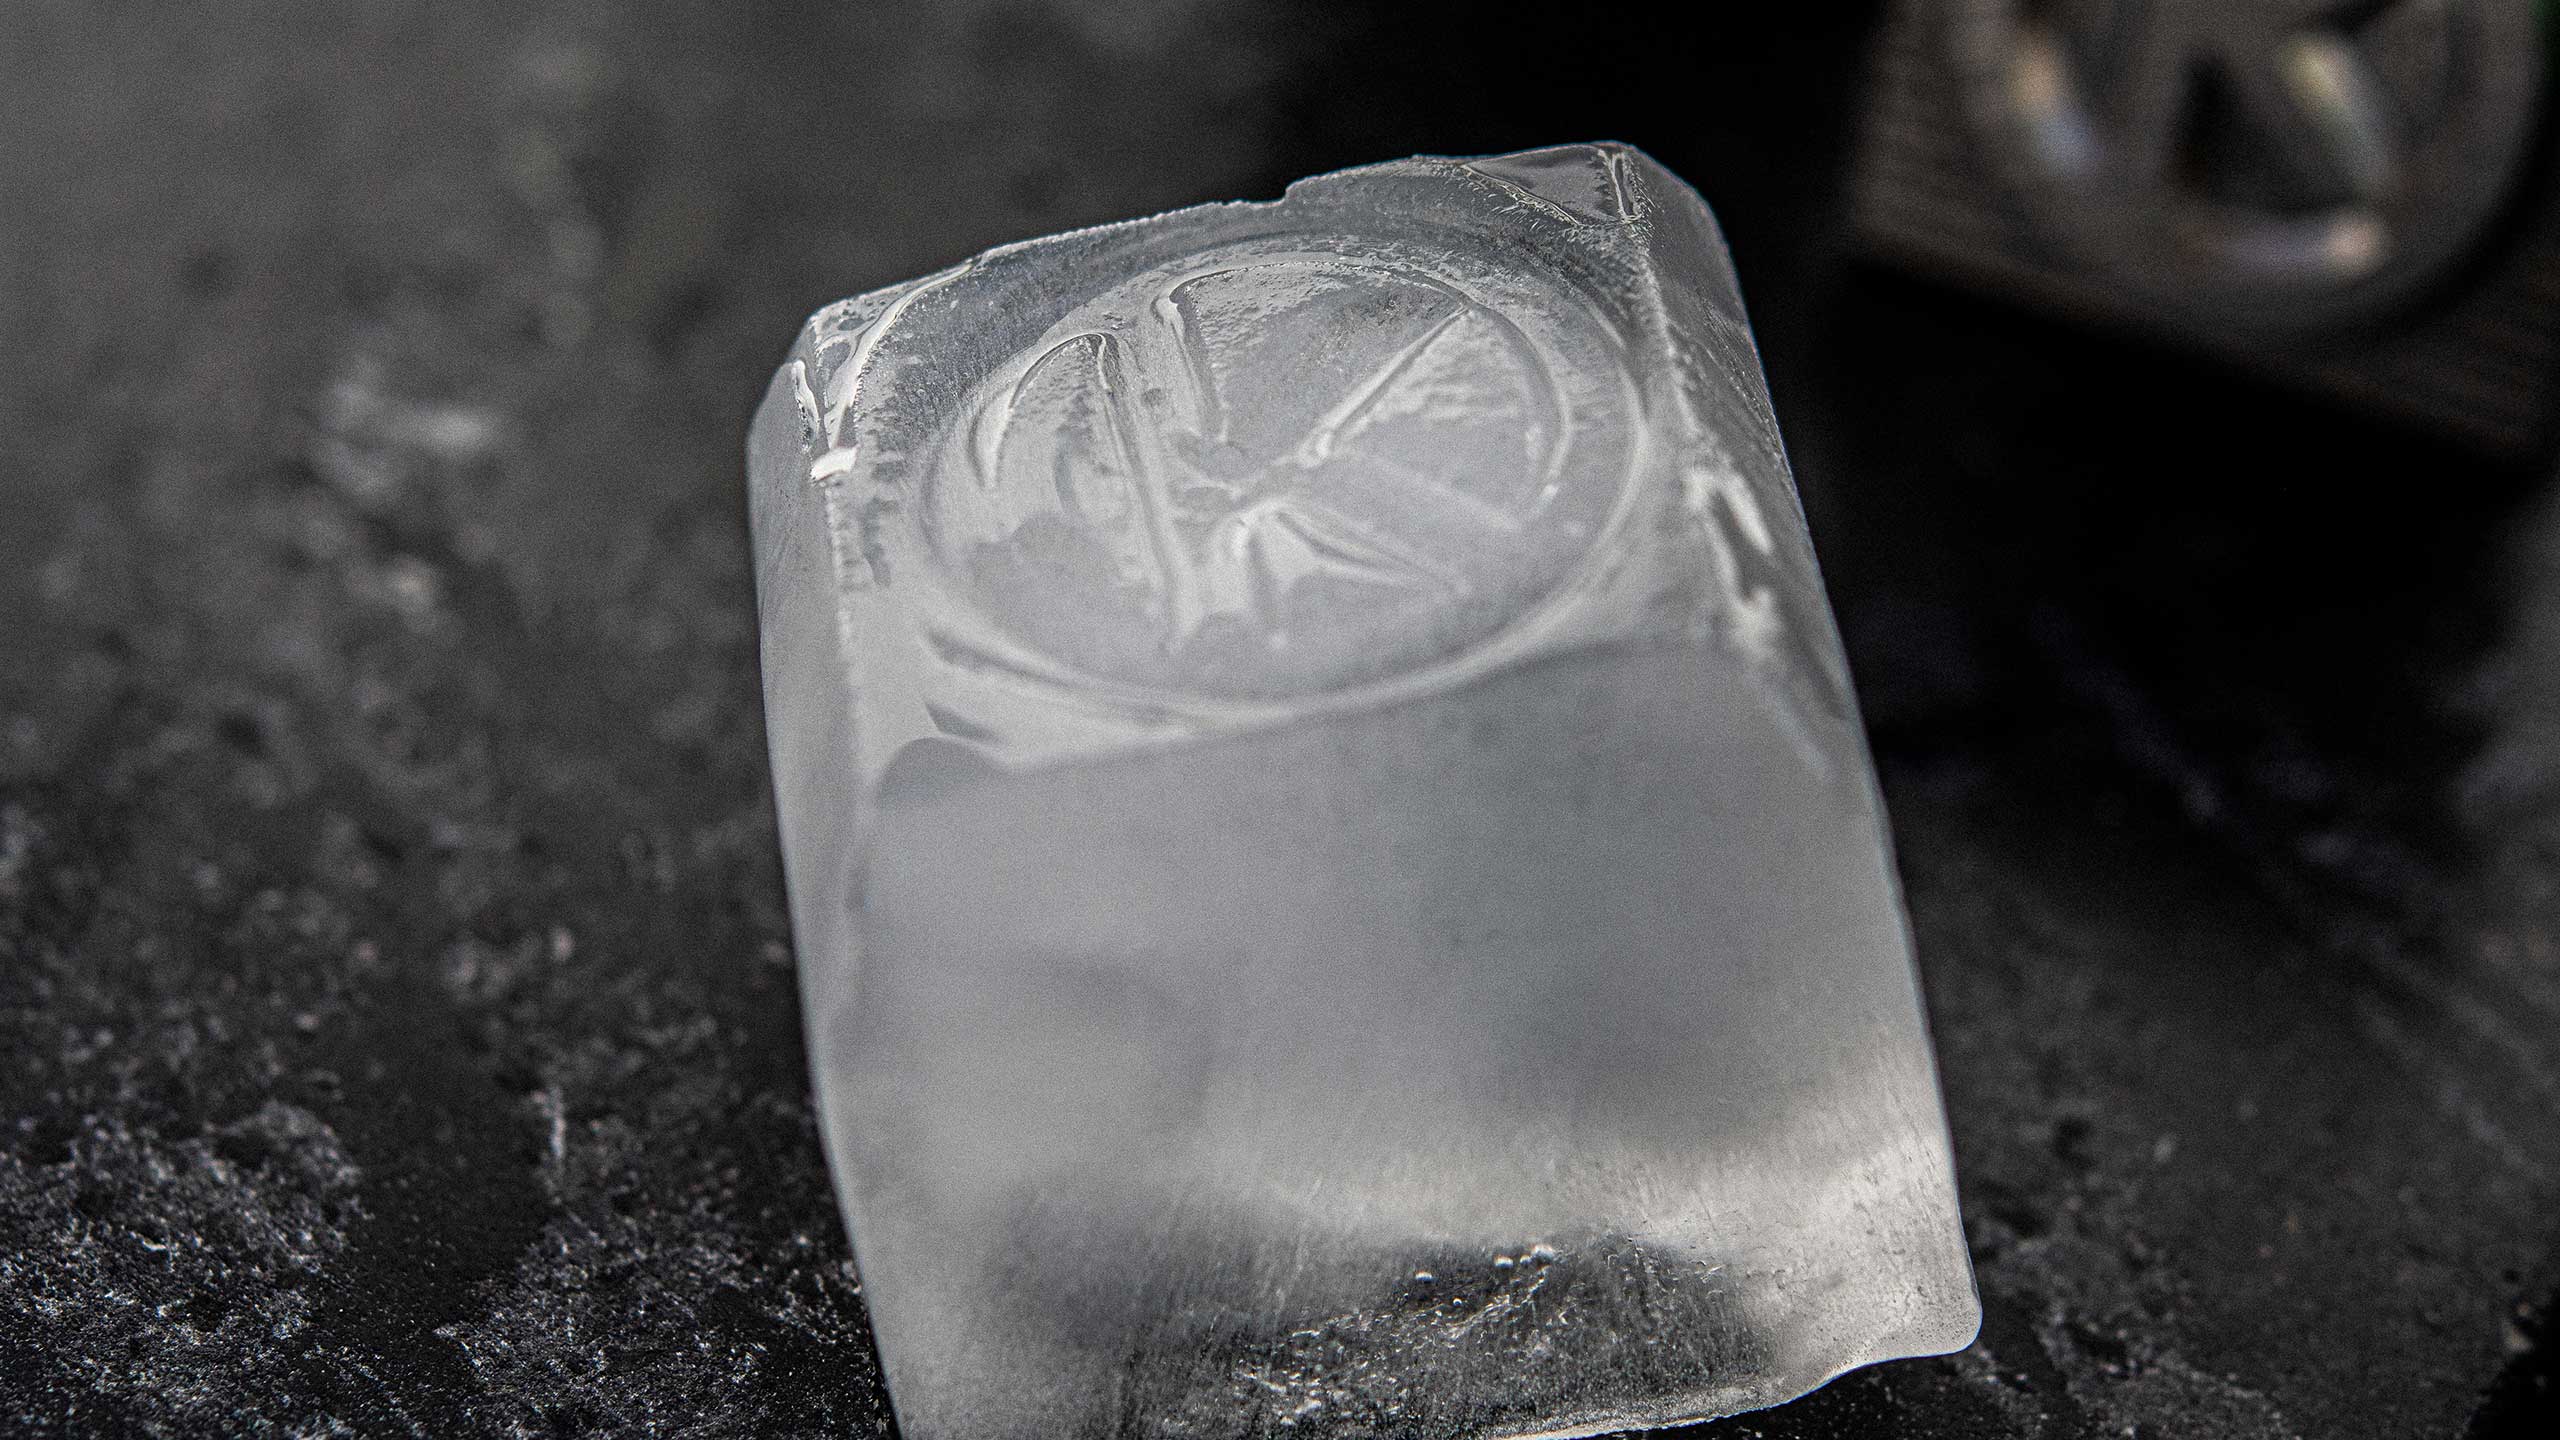 Image of the final design on an ice cube